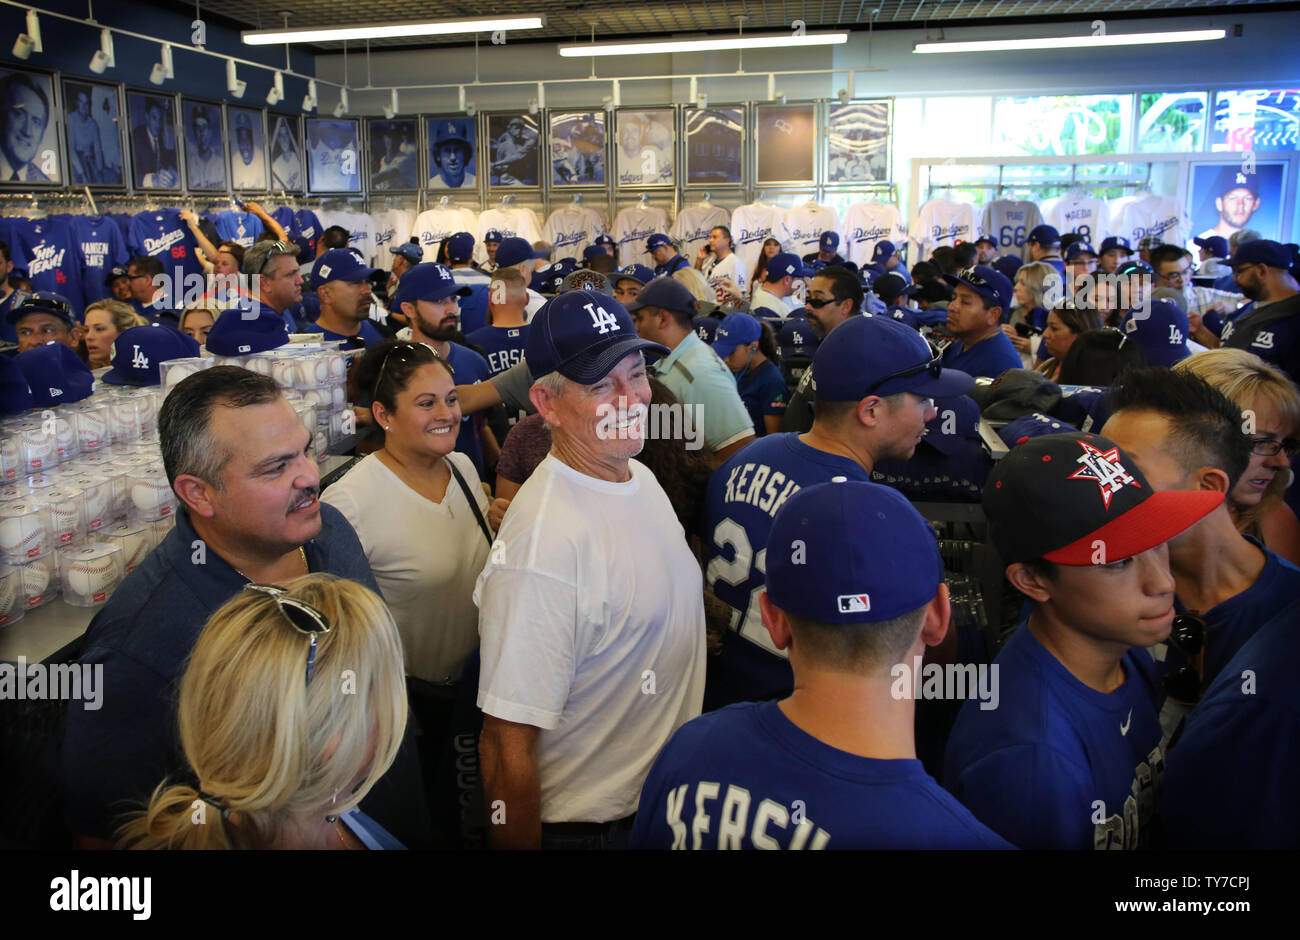 dodgers store